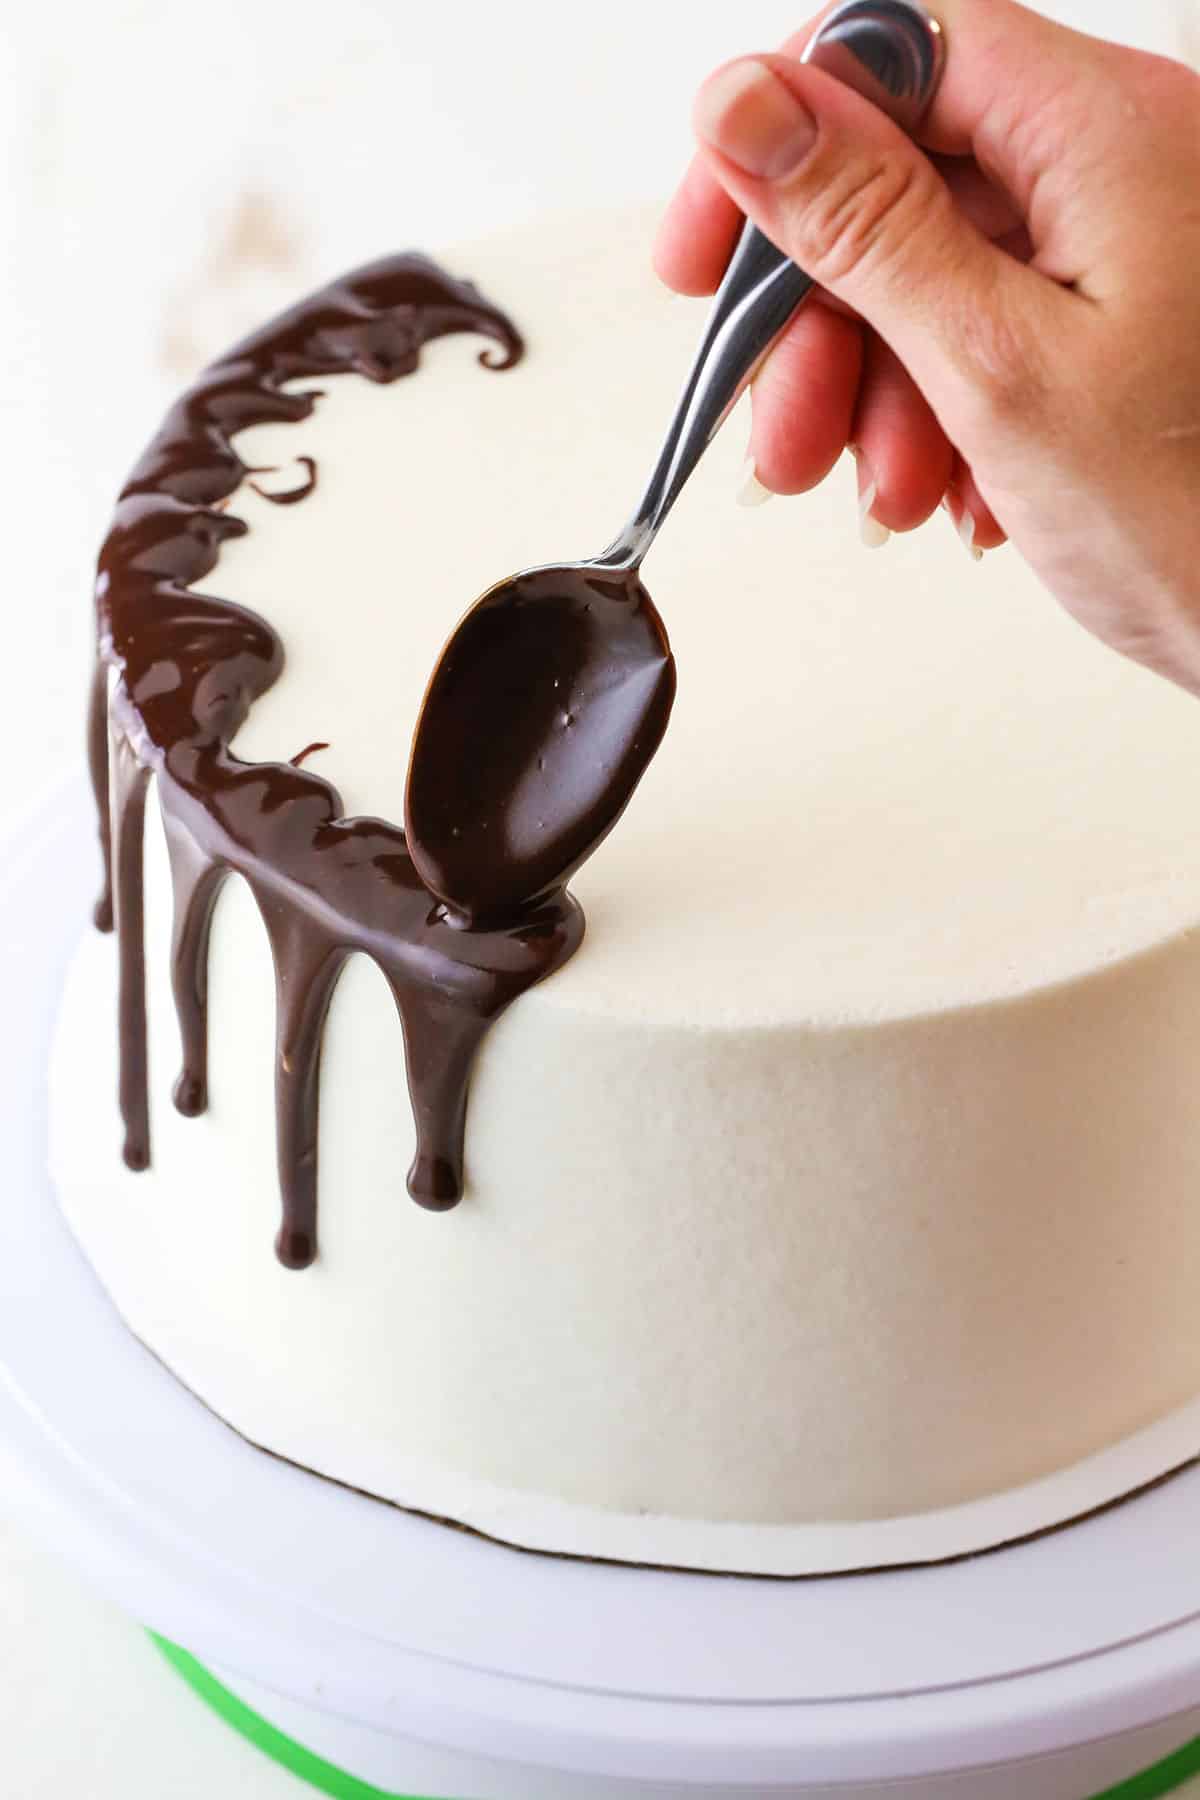 How to Make a Chocolate Drip Cake tutorial showing using a spoon to drip chocolate ganache down the sides of the cake